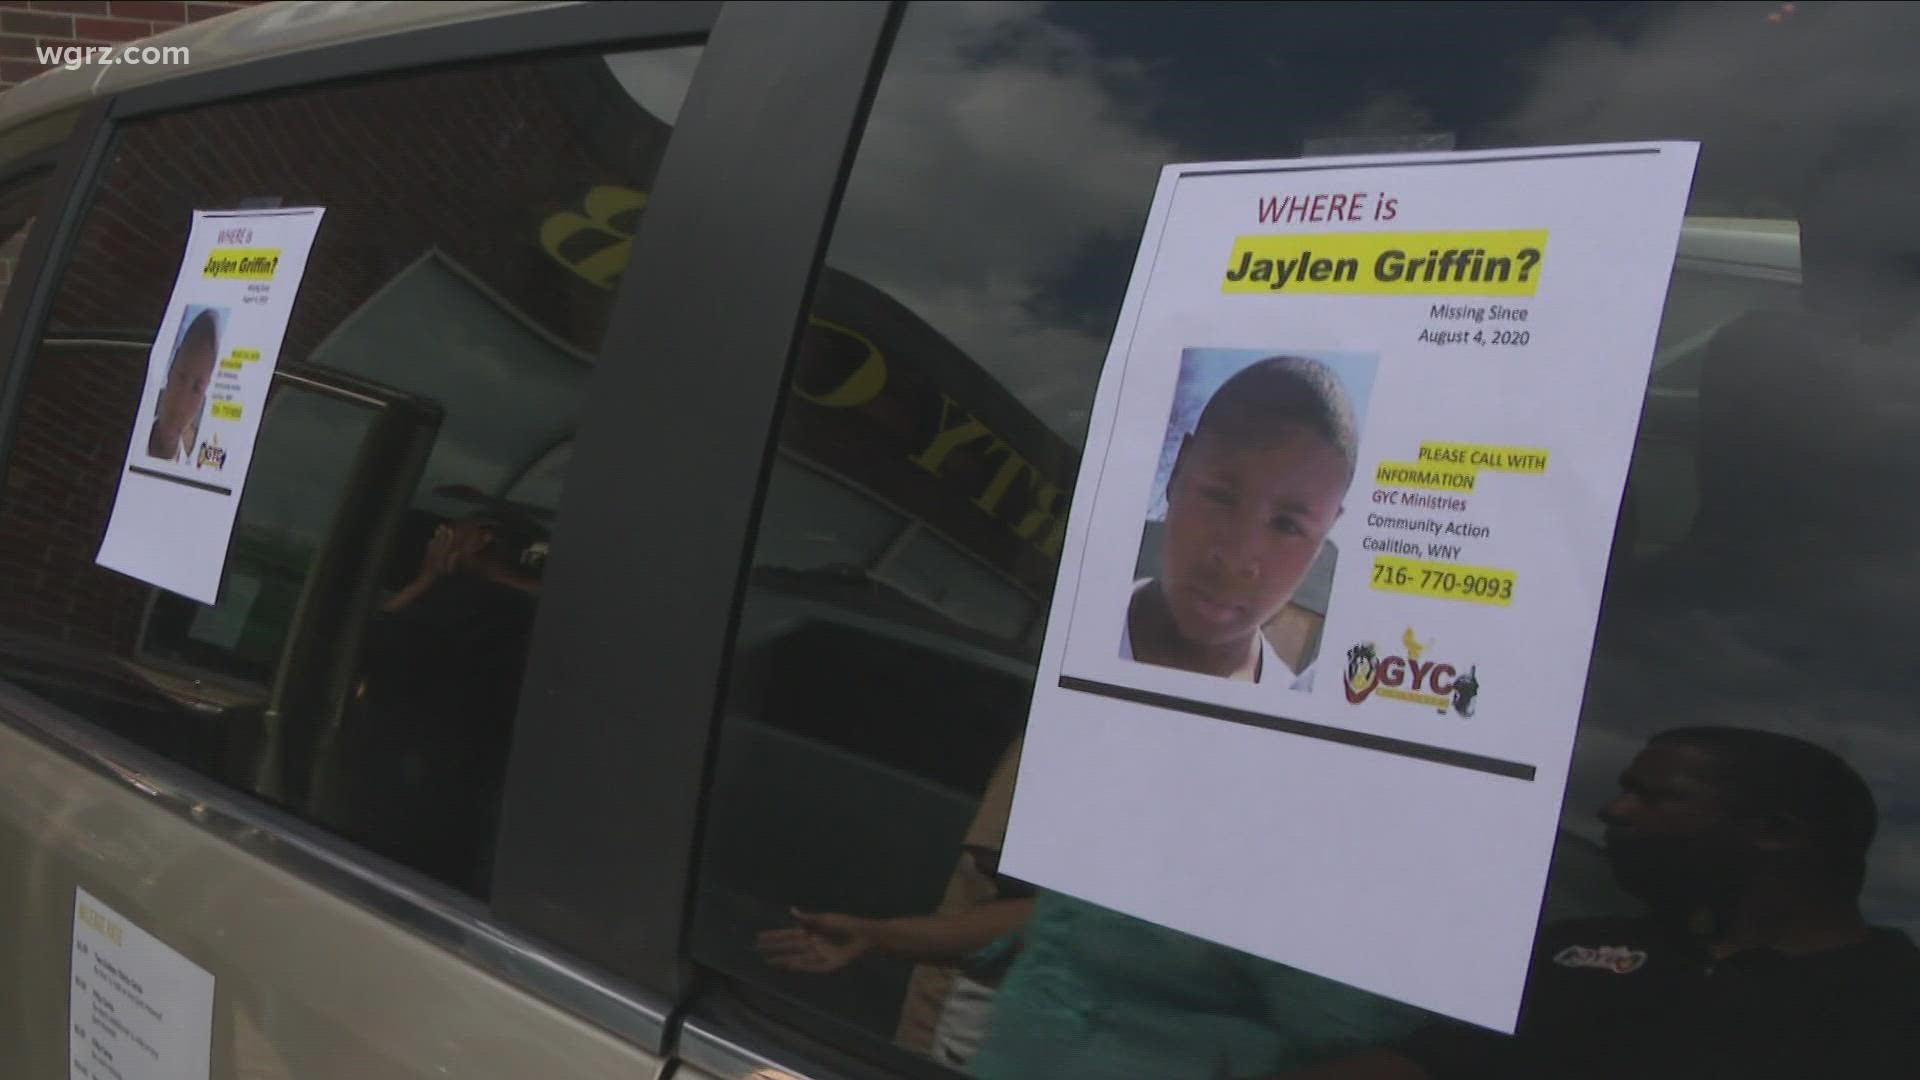 The search for 14-year-old Jaylen Griffin started nearly two years gone. His family and supporters have worked tirelessly to bring him back home.